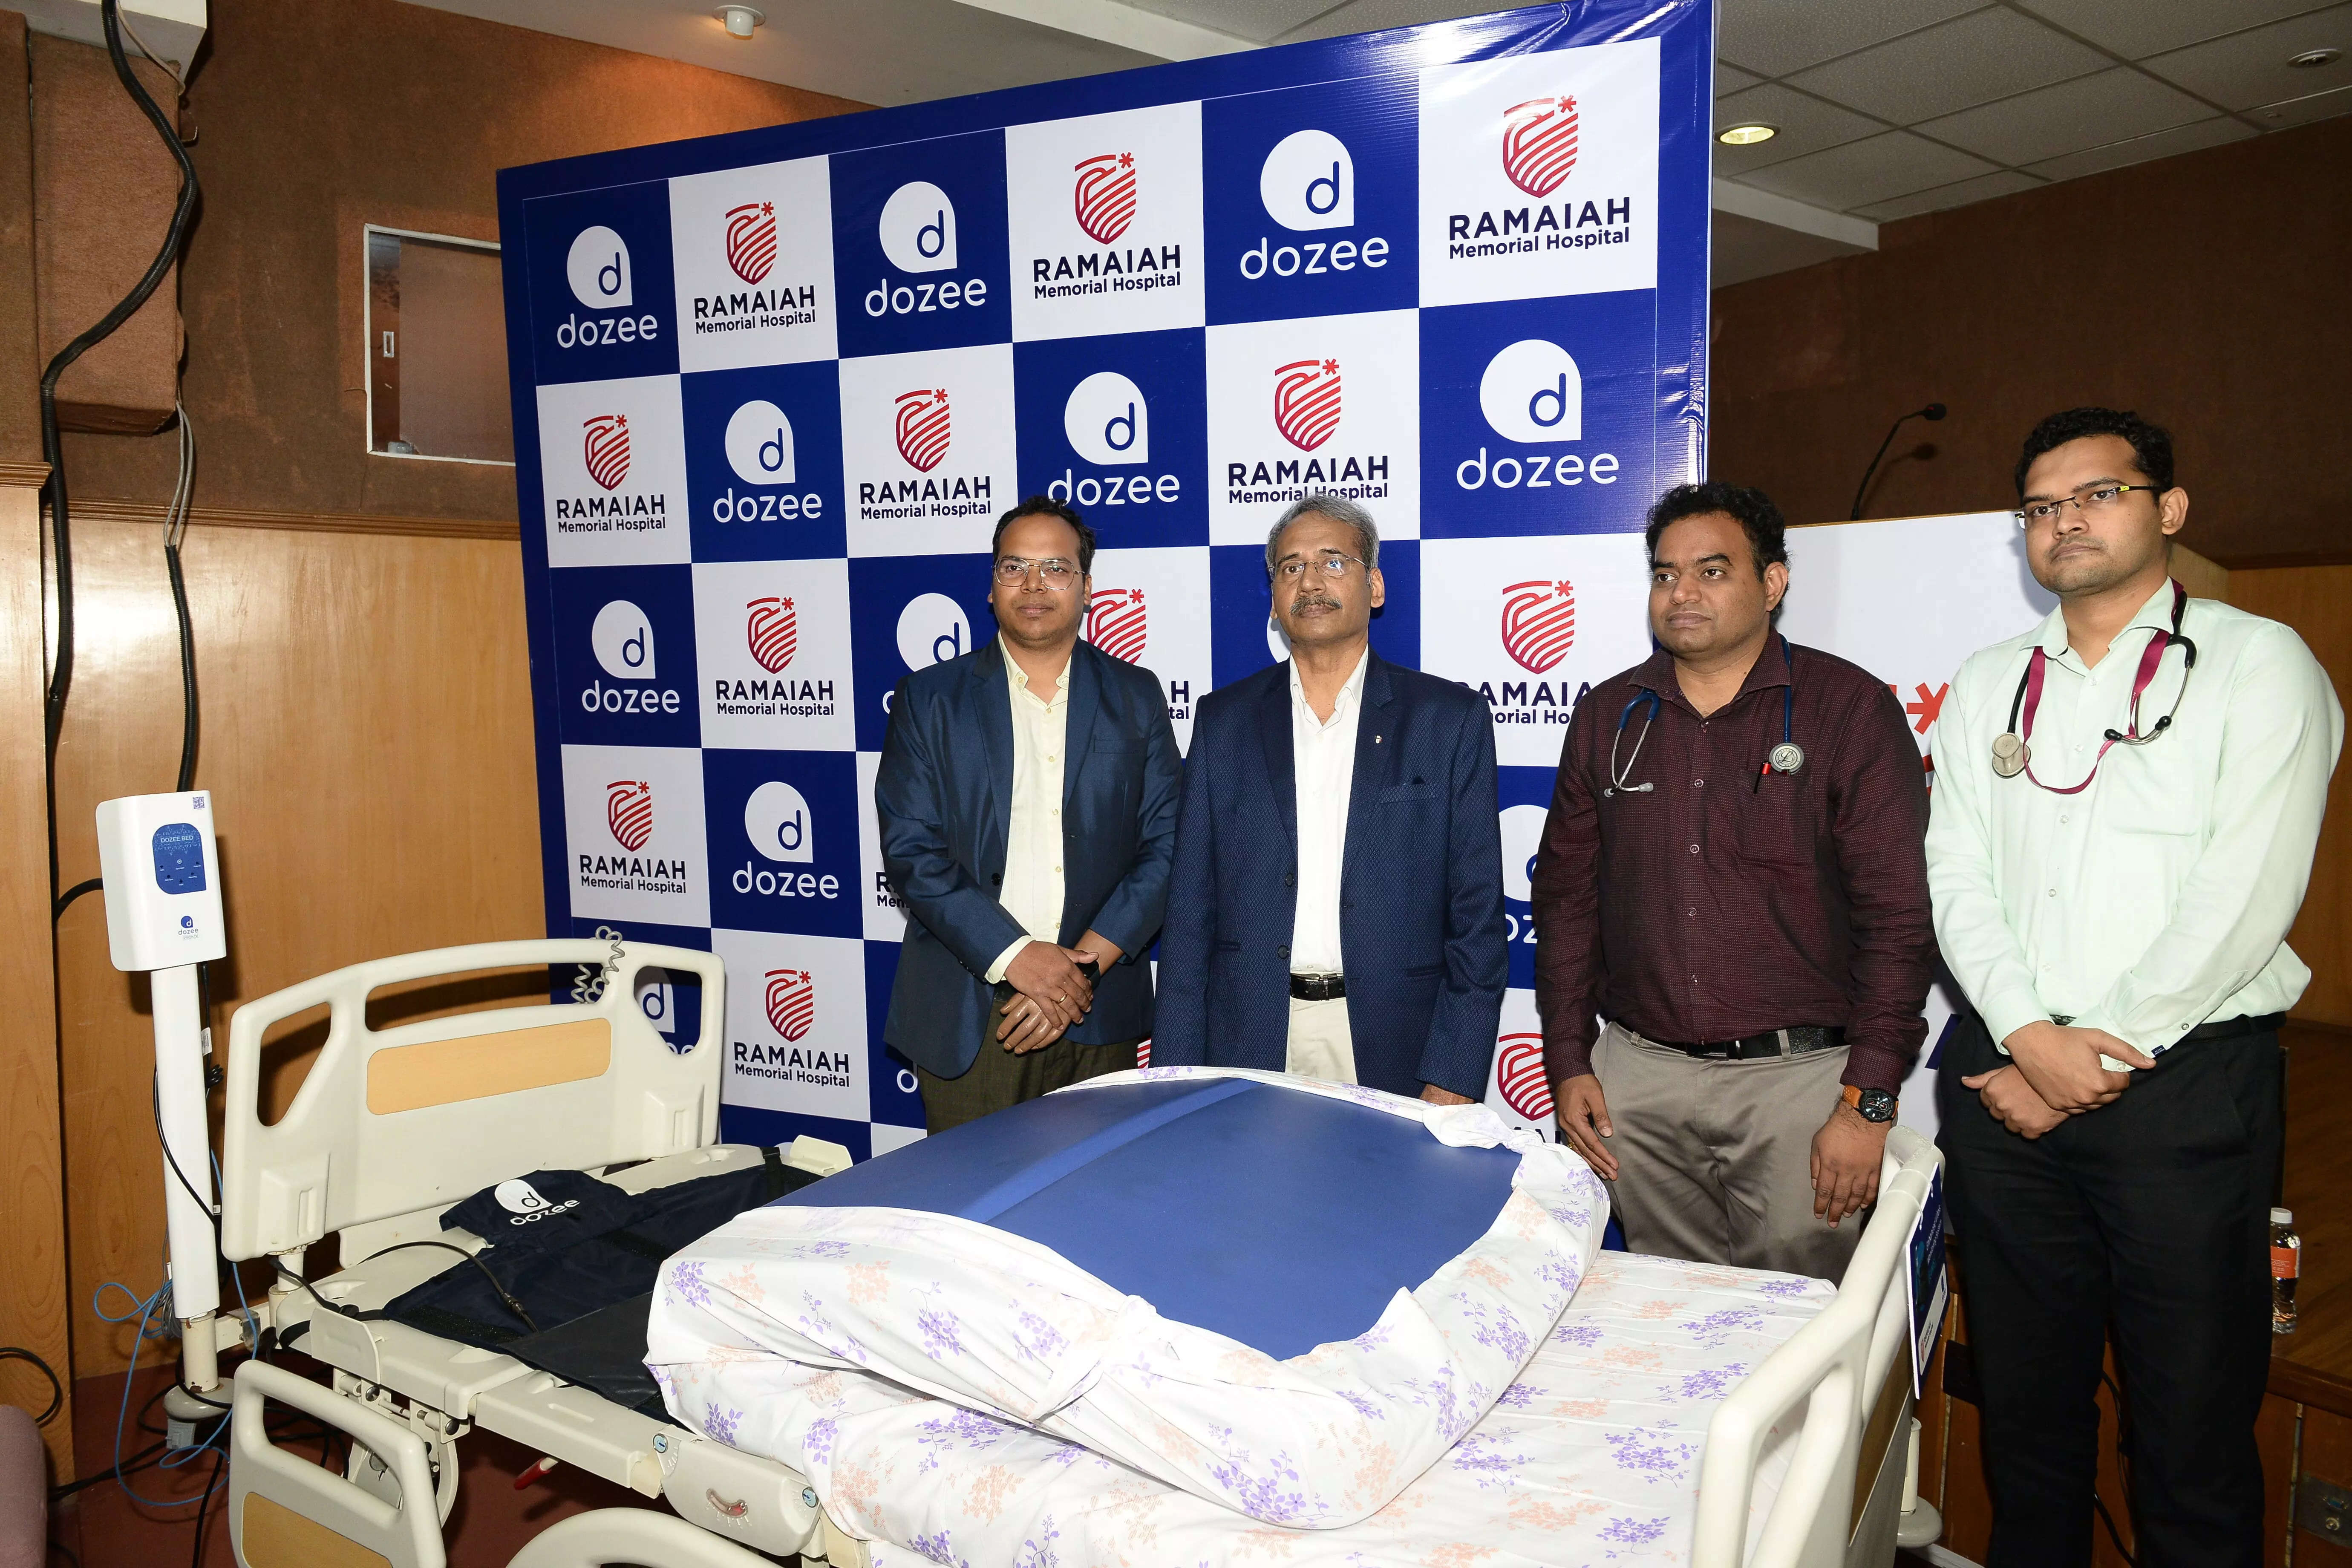 Ramaiah Memorial adopts Dozee’s AI solutions for patient monitoring